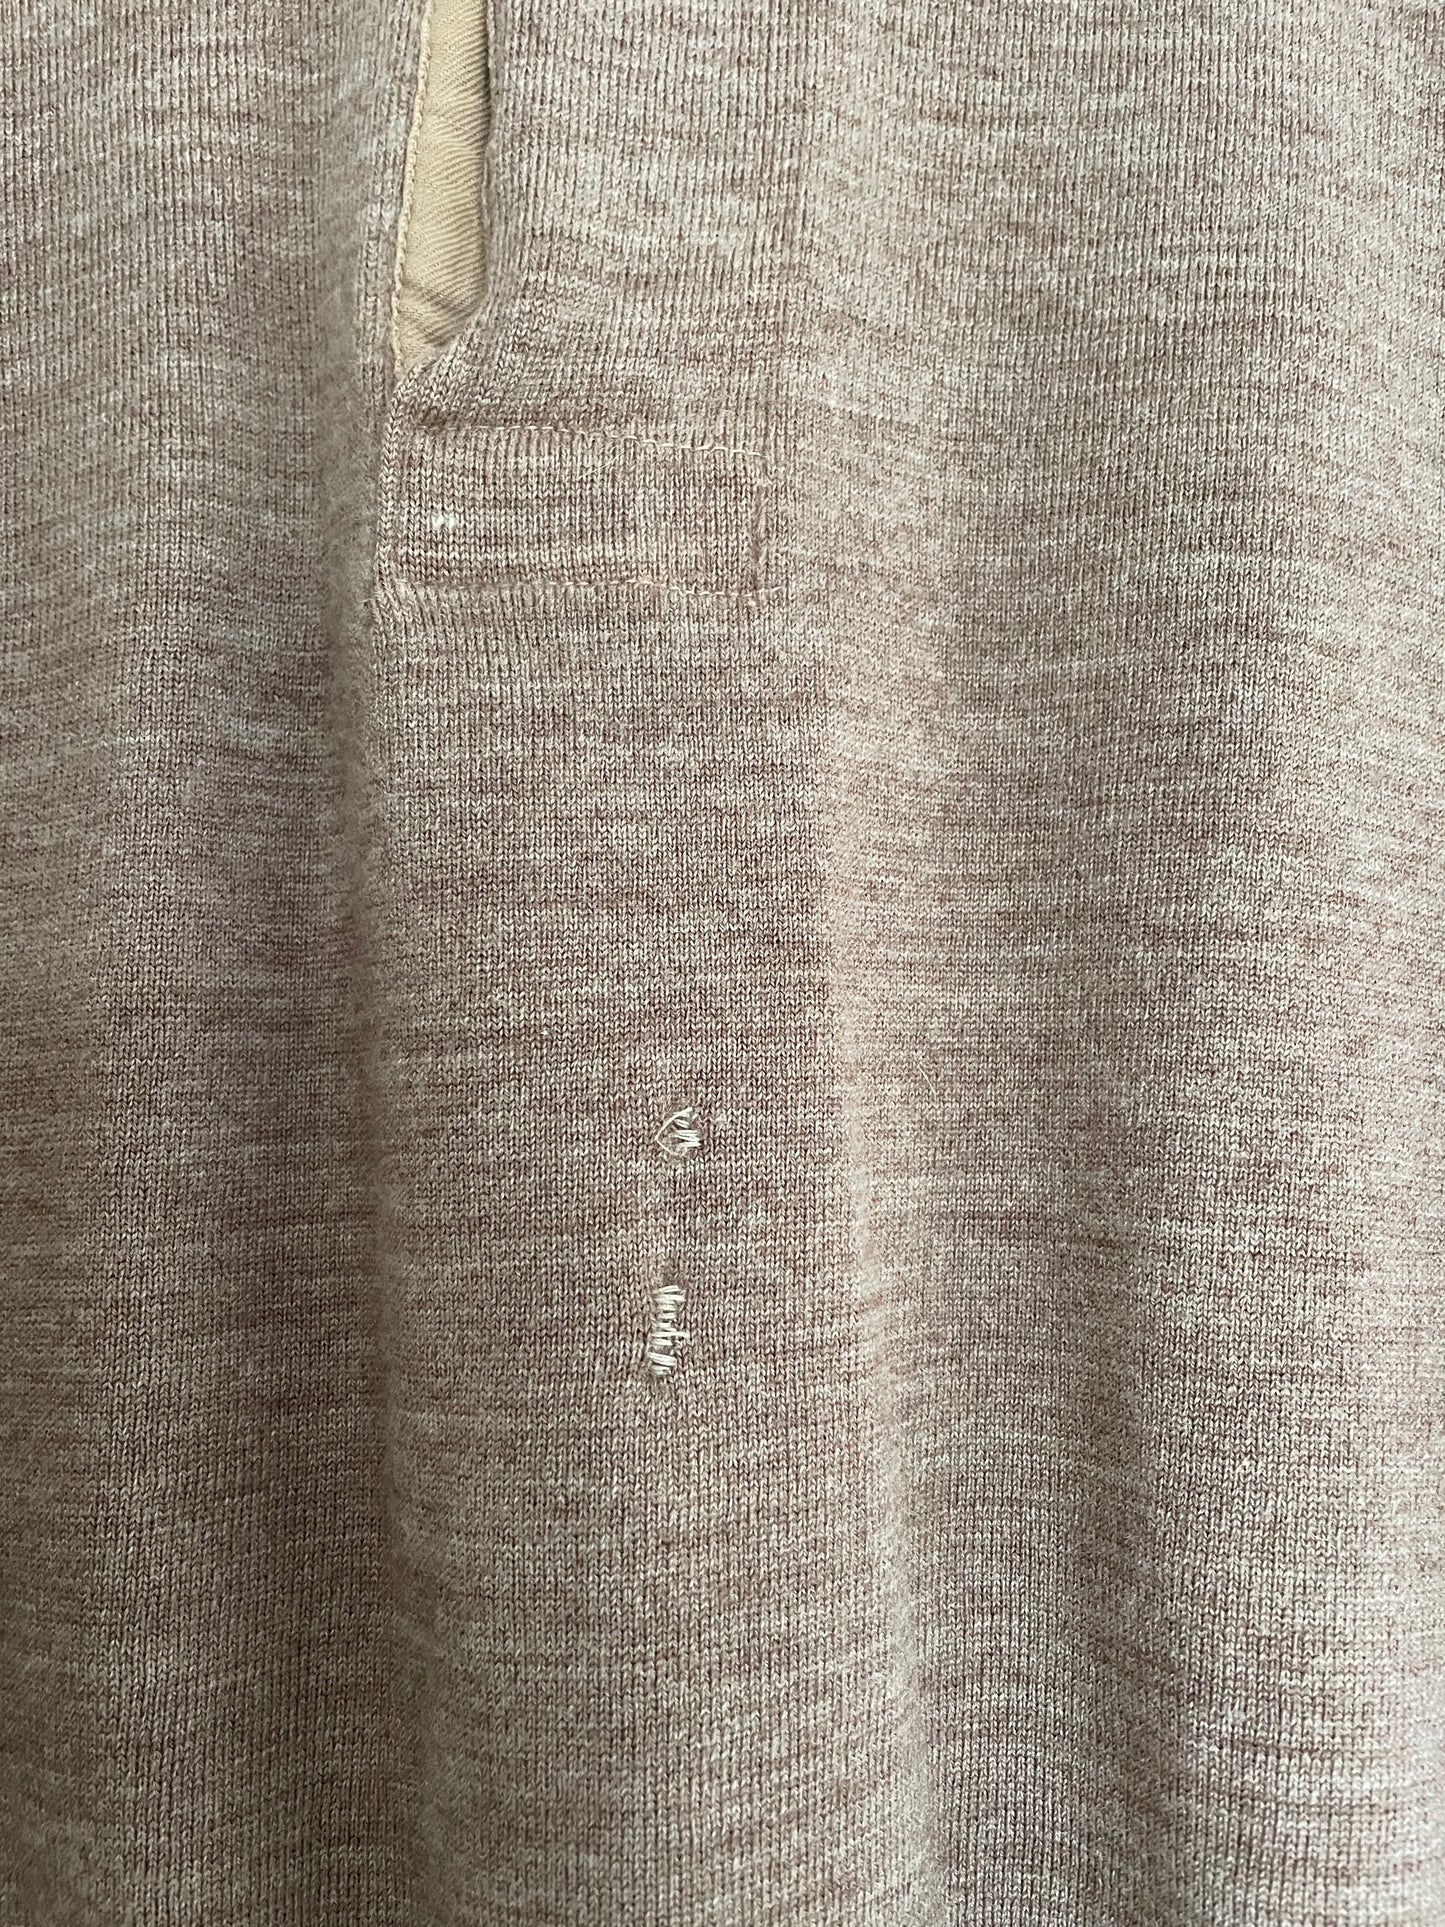 40s/50s Brown Thermal Henley